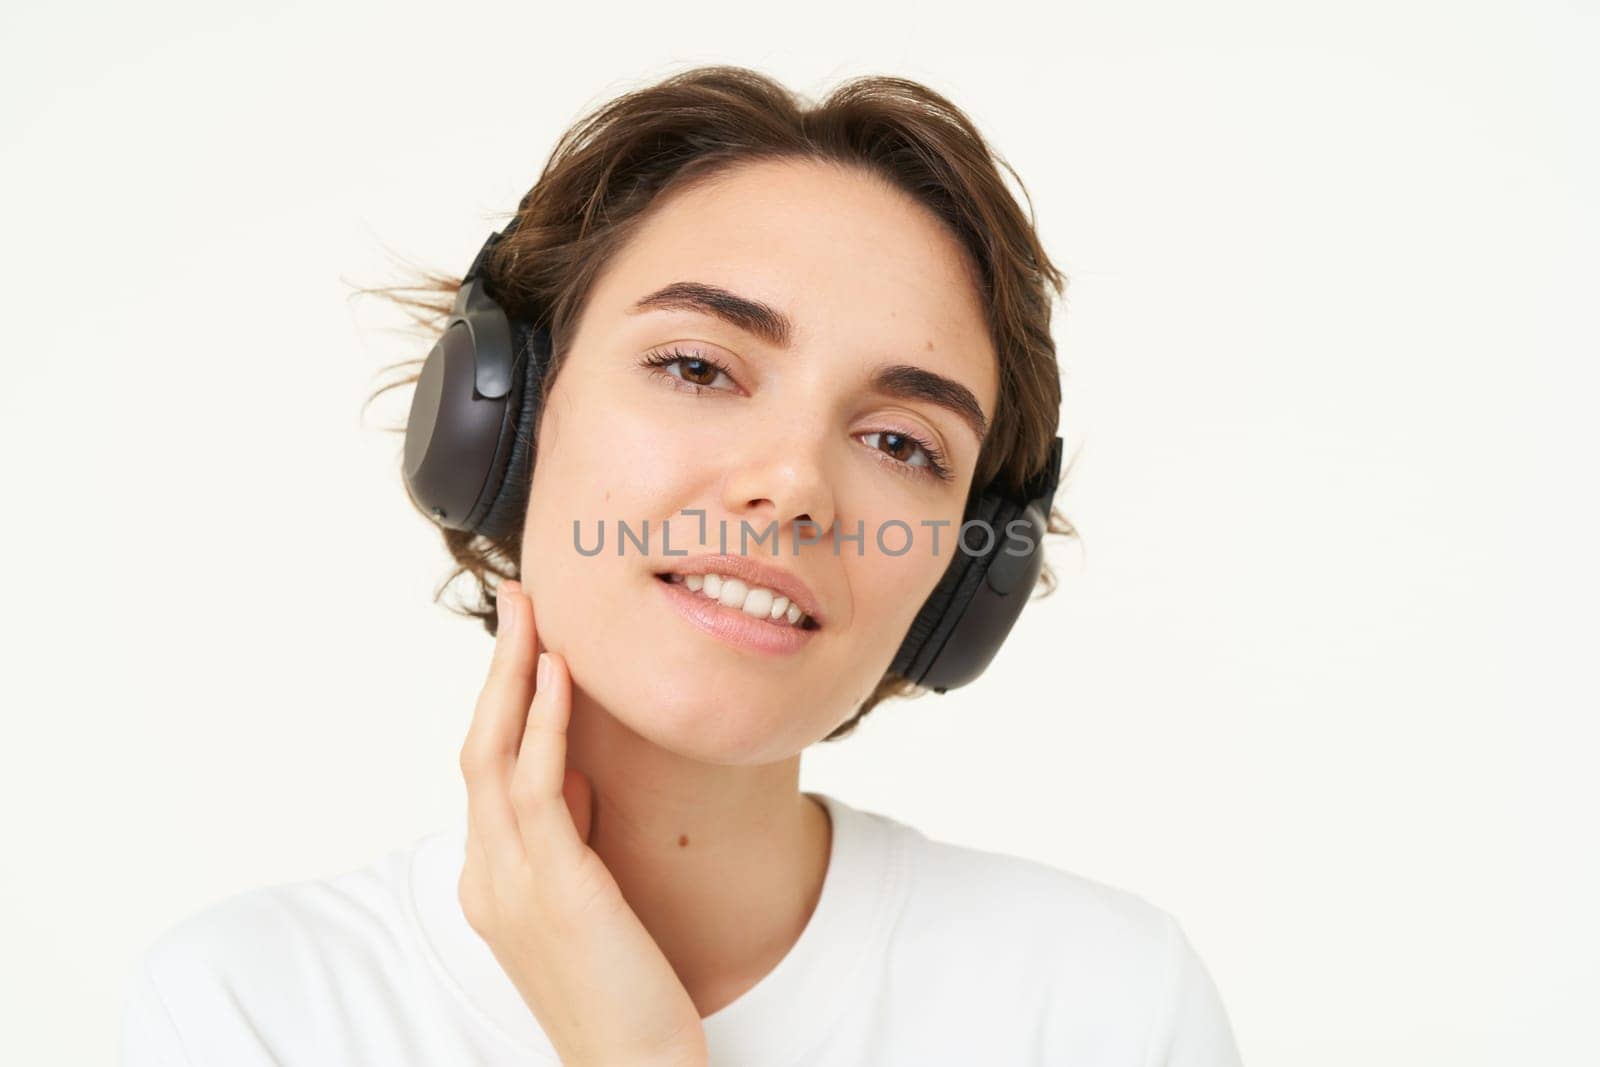 Portrait of young candid woman in wireless headphones, smiling, listening music in earphones, standing over white background.